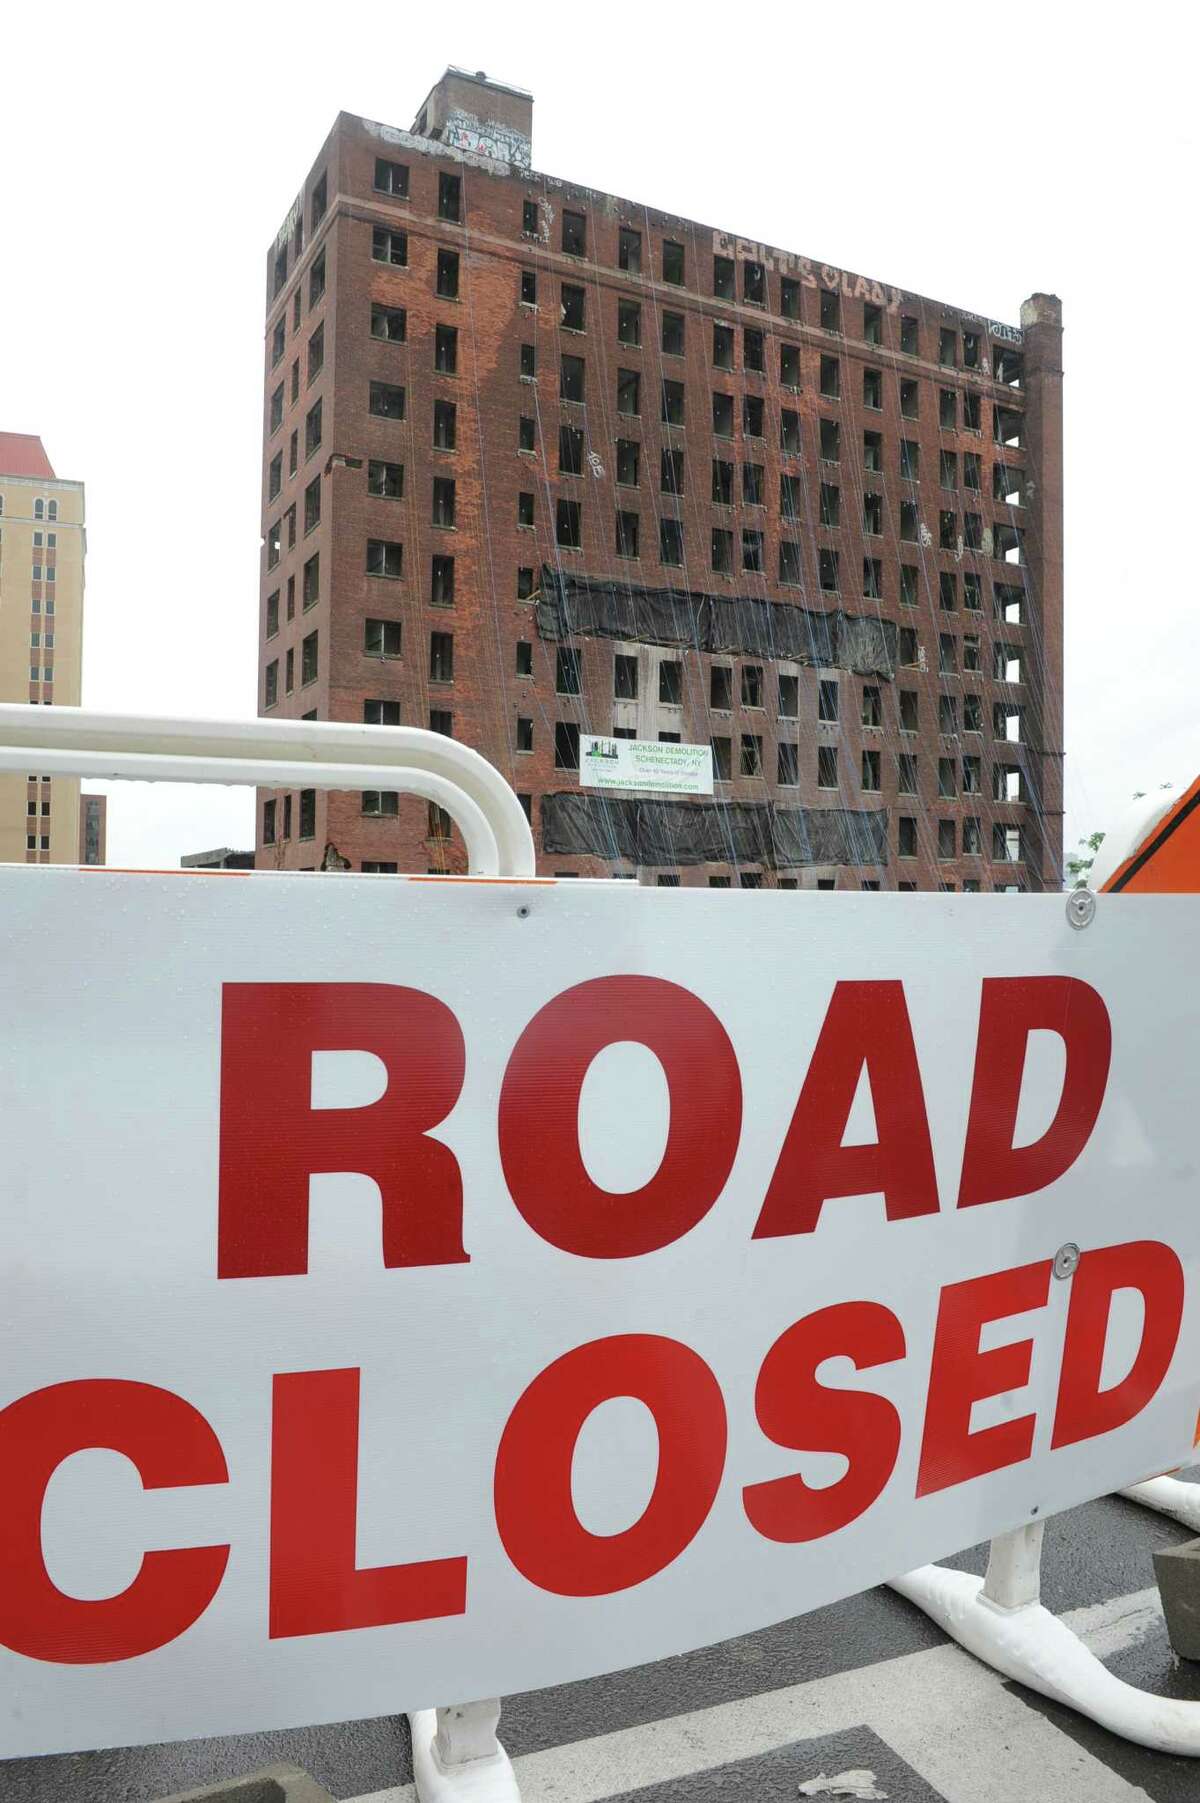 Demolition crews work on getting the Wellington Hotel Annex on Howard Street ready to be imploded Friday afternoon, Aug. 22, 2014, in Albany, N.Y. The building is scheduled to come down Saturday morning at around 9:30. (Lori Van Buren / Times Union)